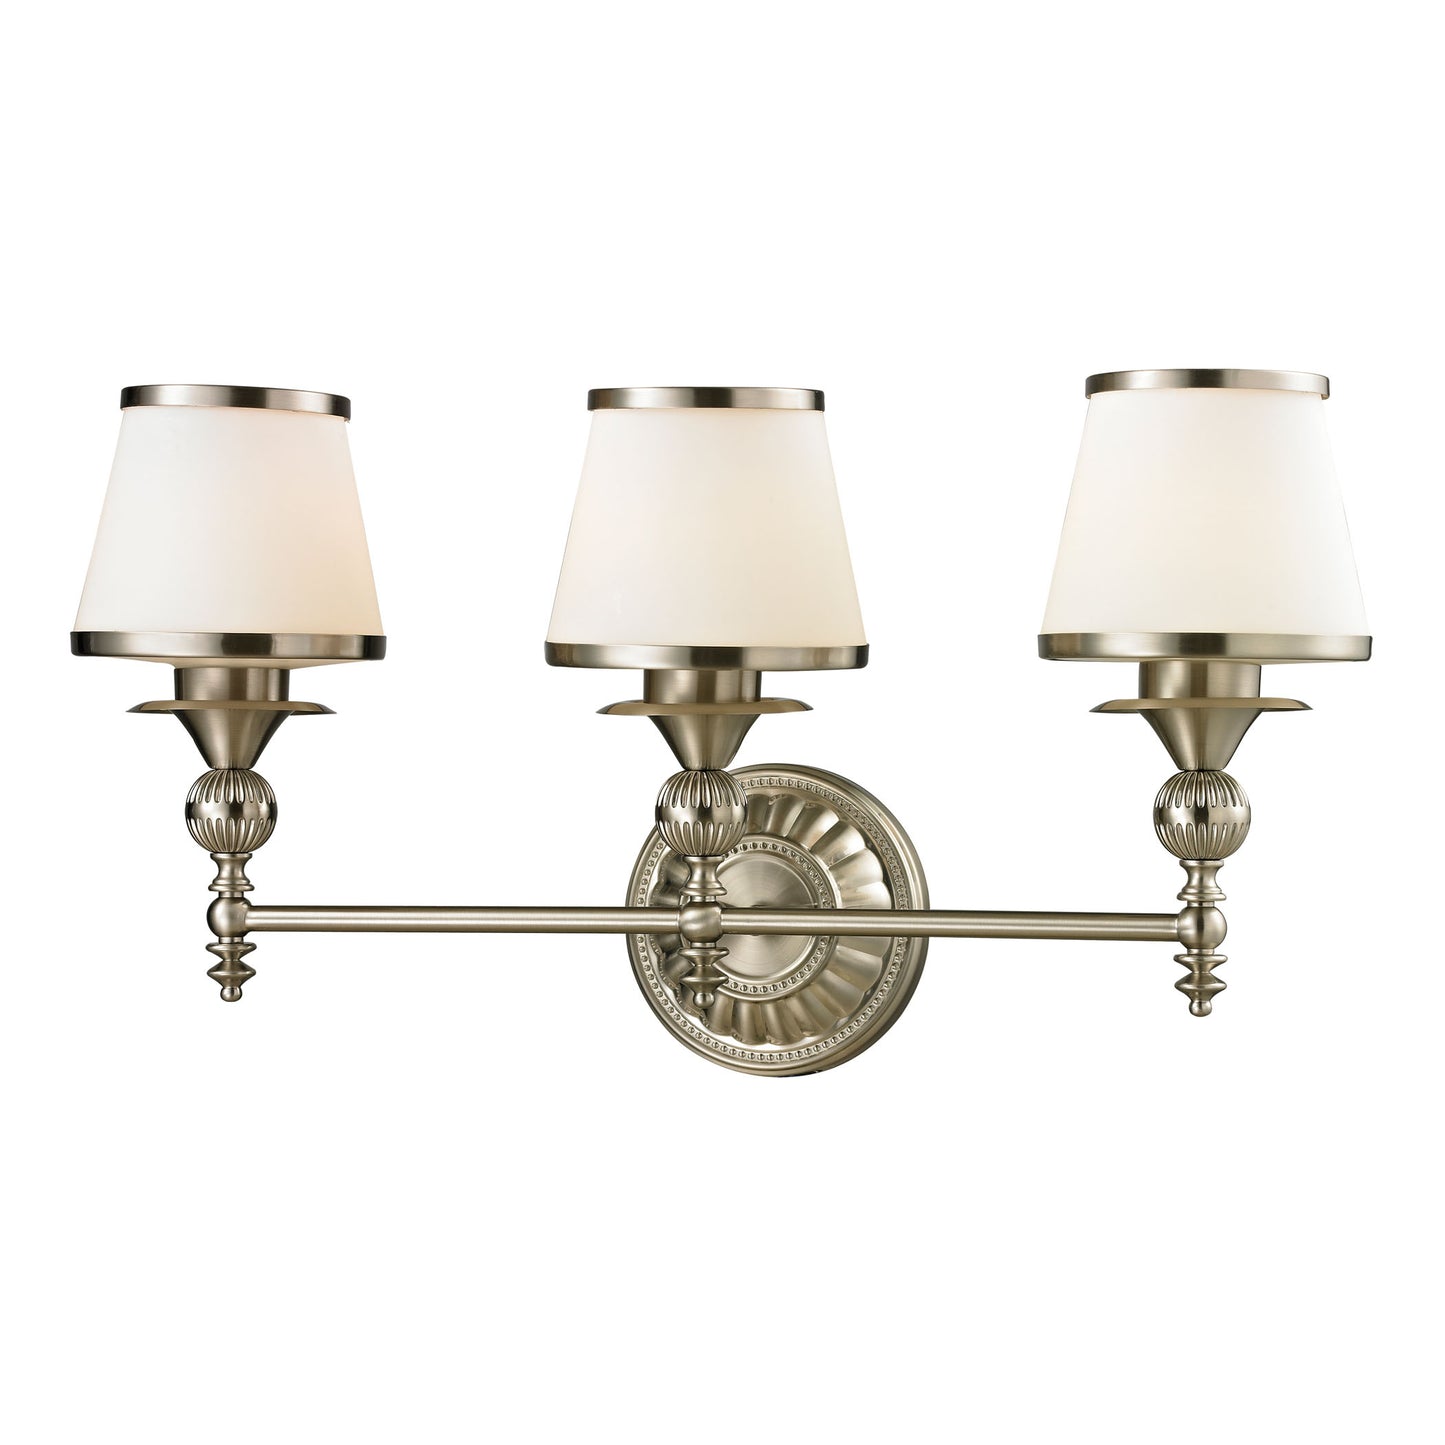 Smithfield 3-Light Vanity Lamp in Brushed Nickel with Opal White Blown Glass